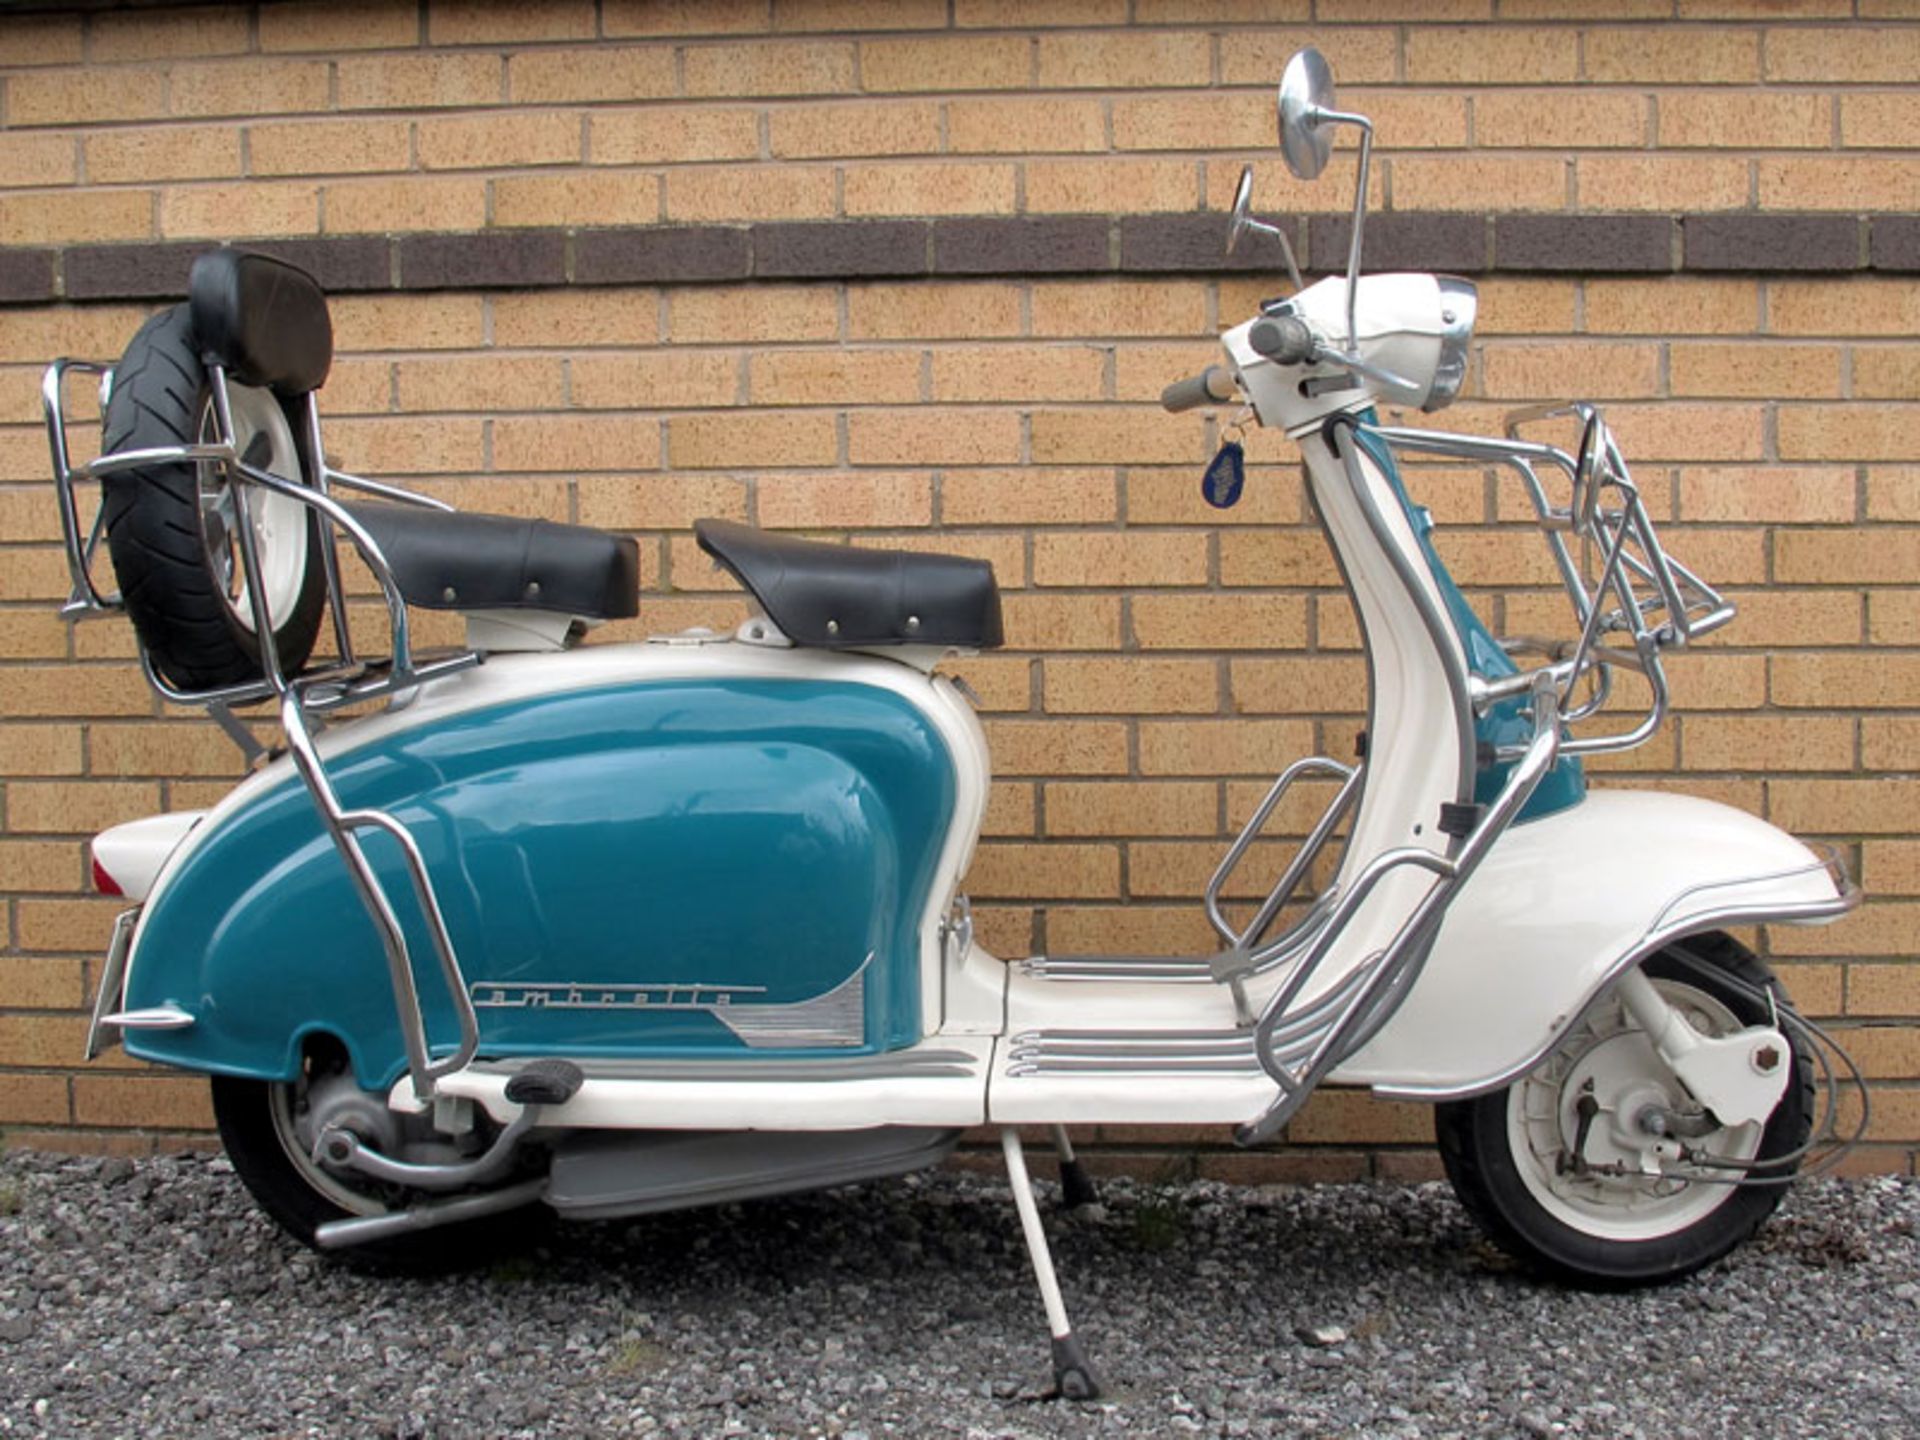 - Restored example

- Original specification

- Iconic 60's Scooter